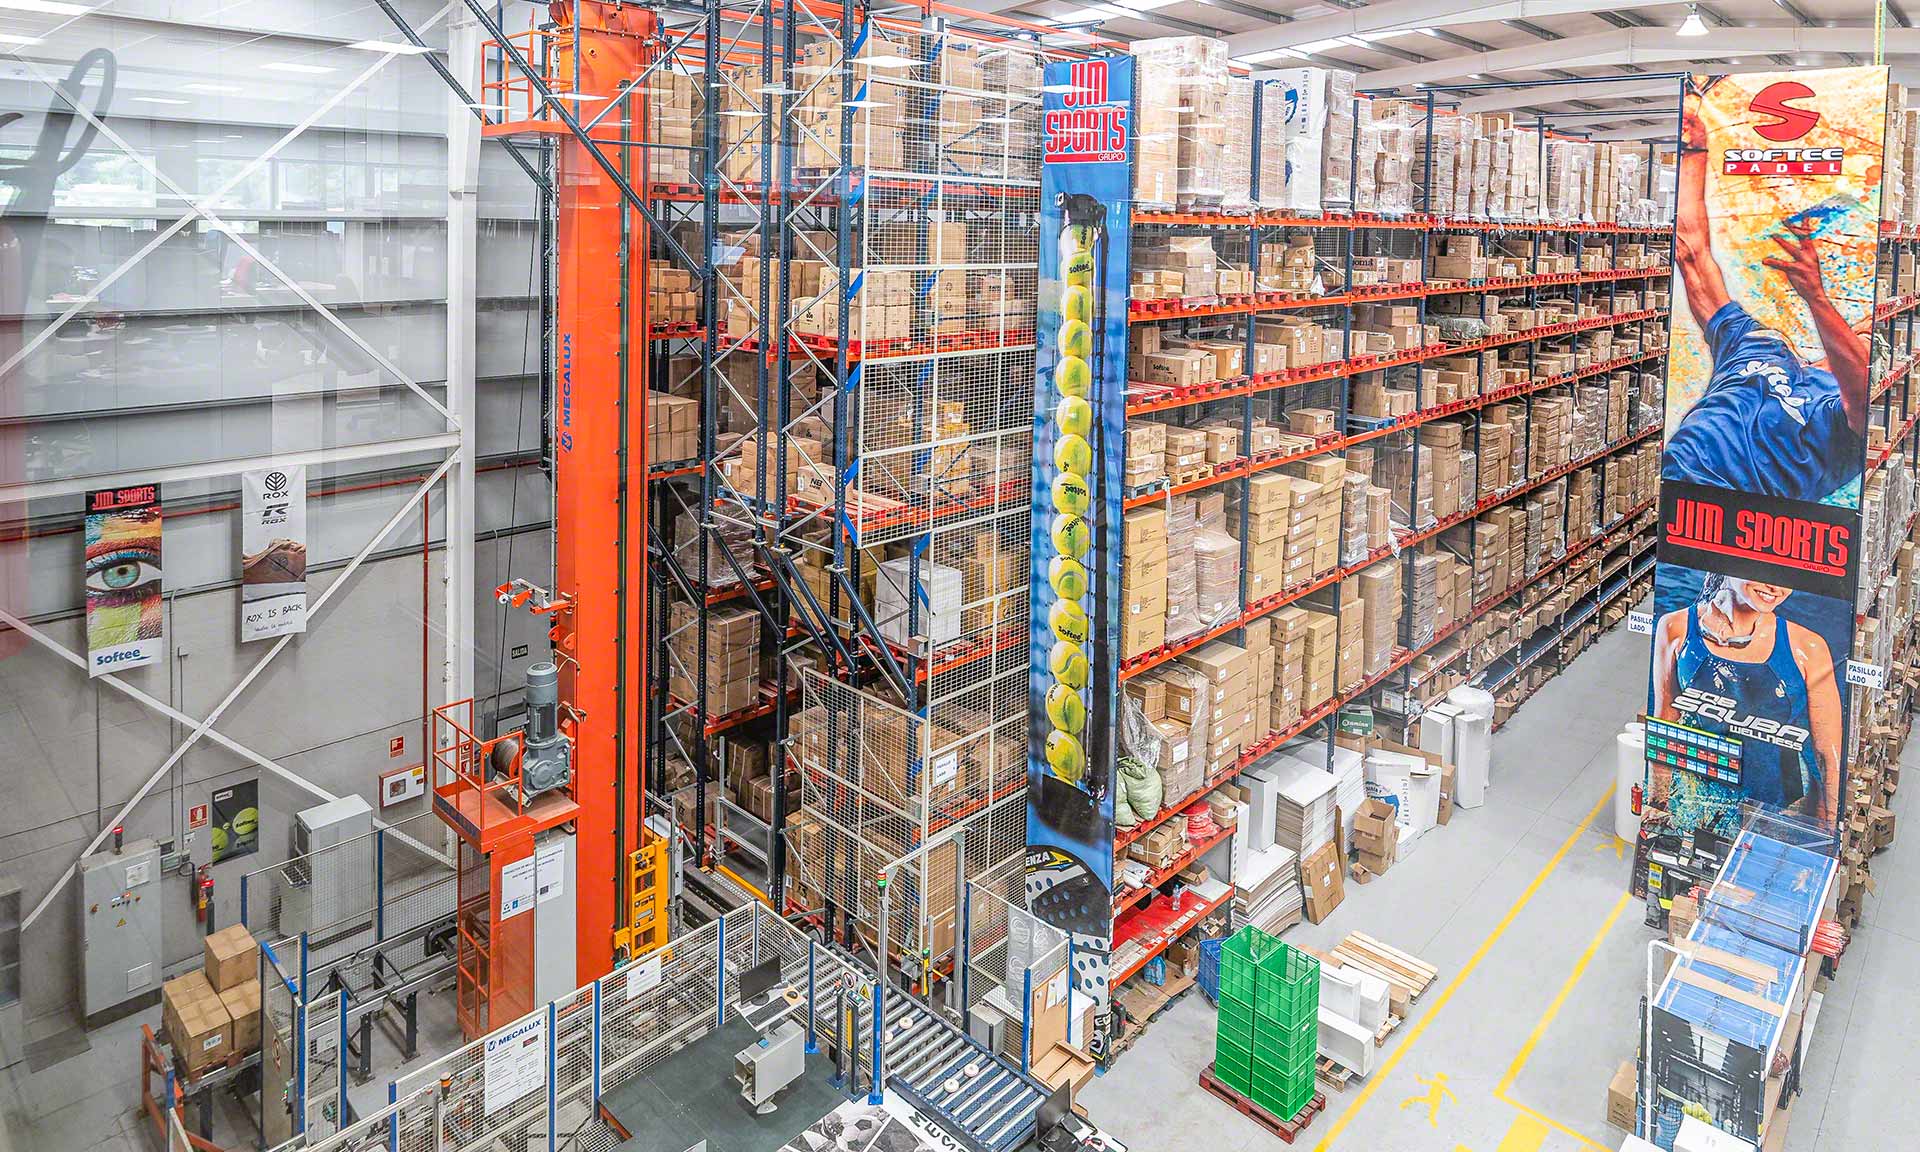 Jim Sports digitises its warehouse with a comprehensive logistics solution from Mecalux.